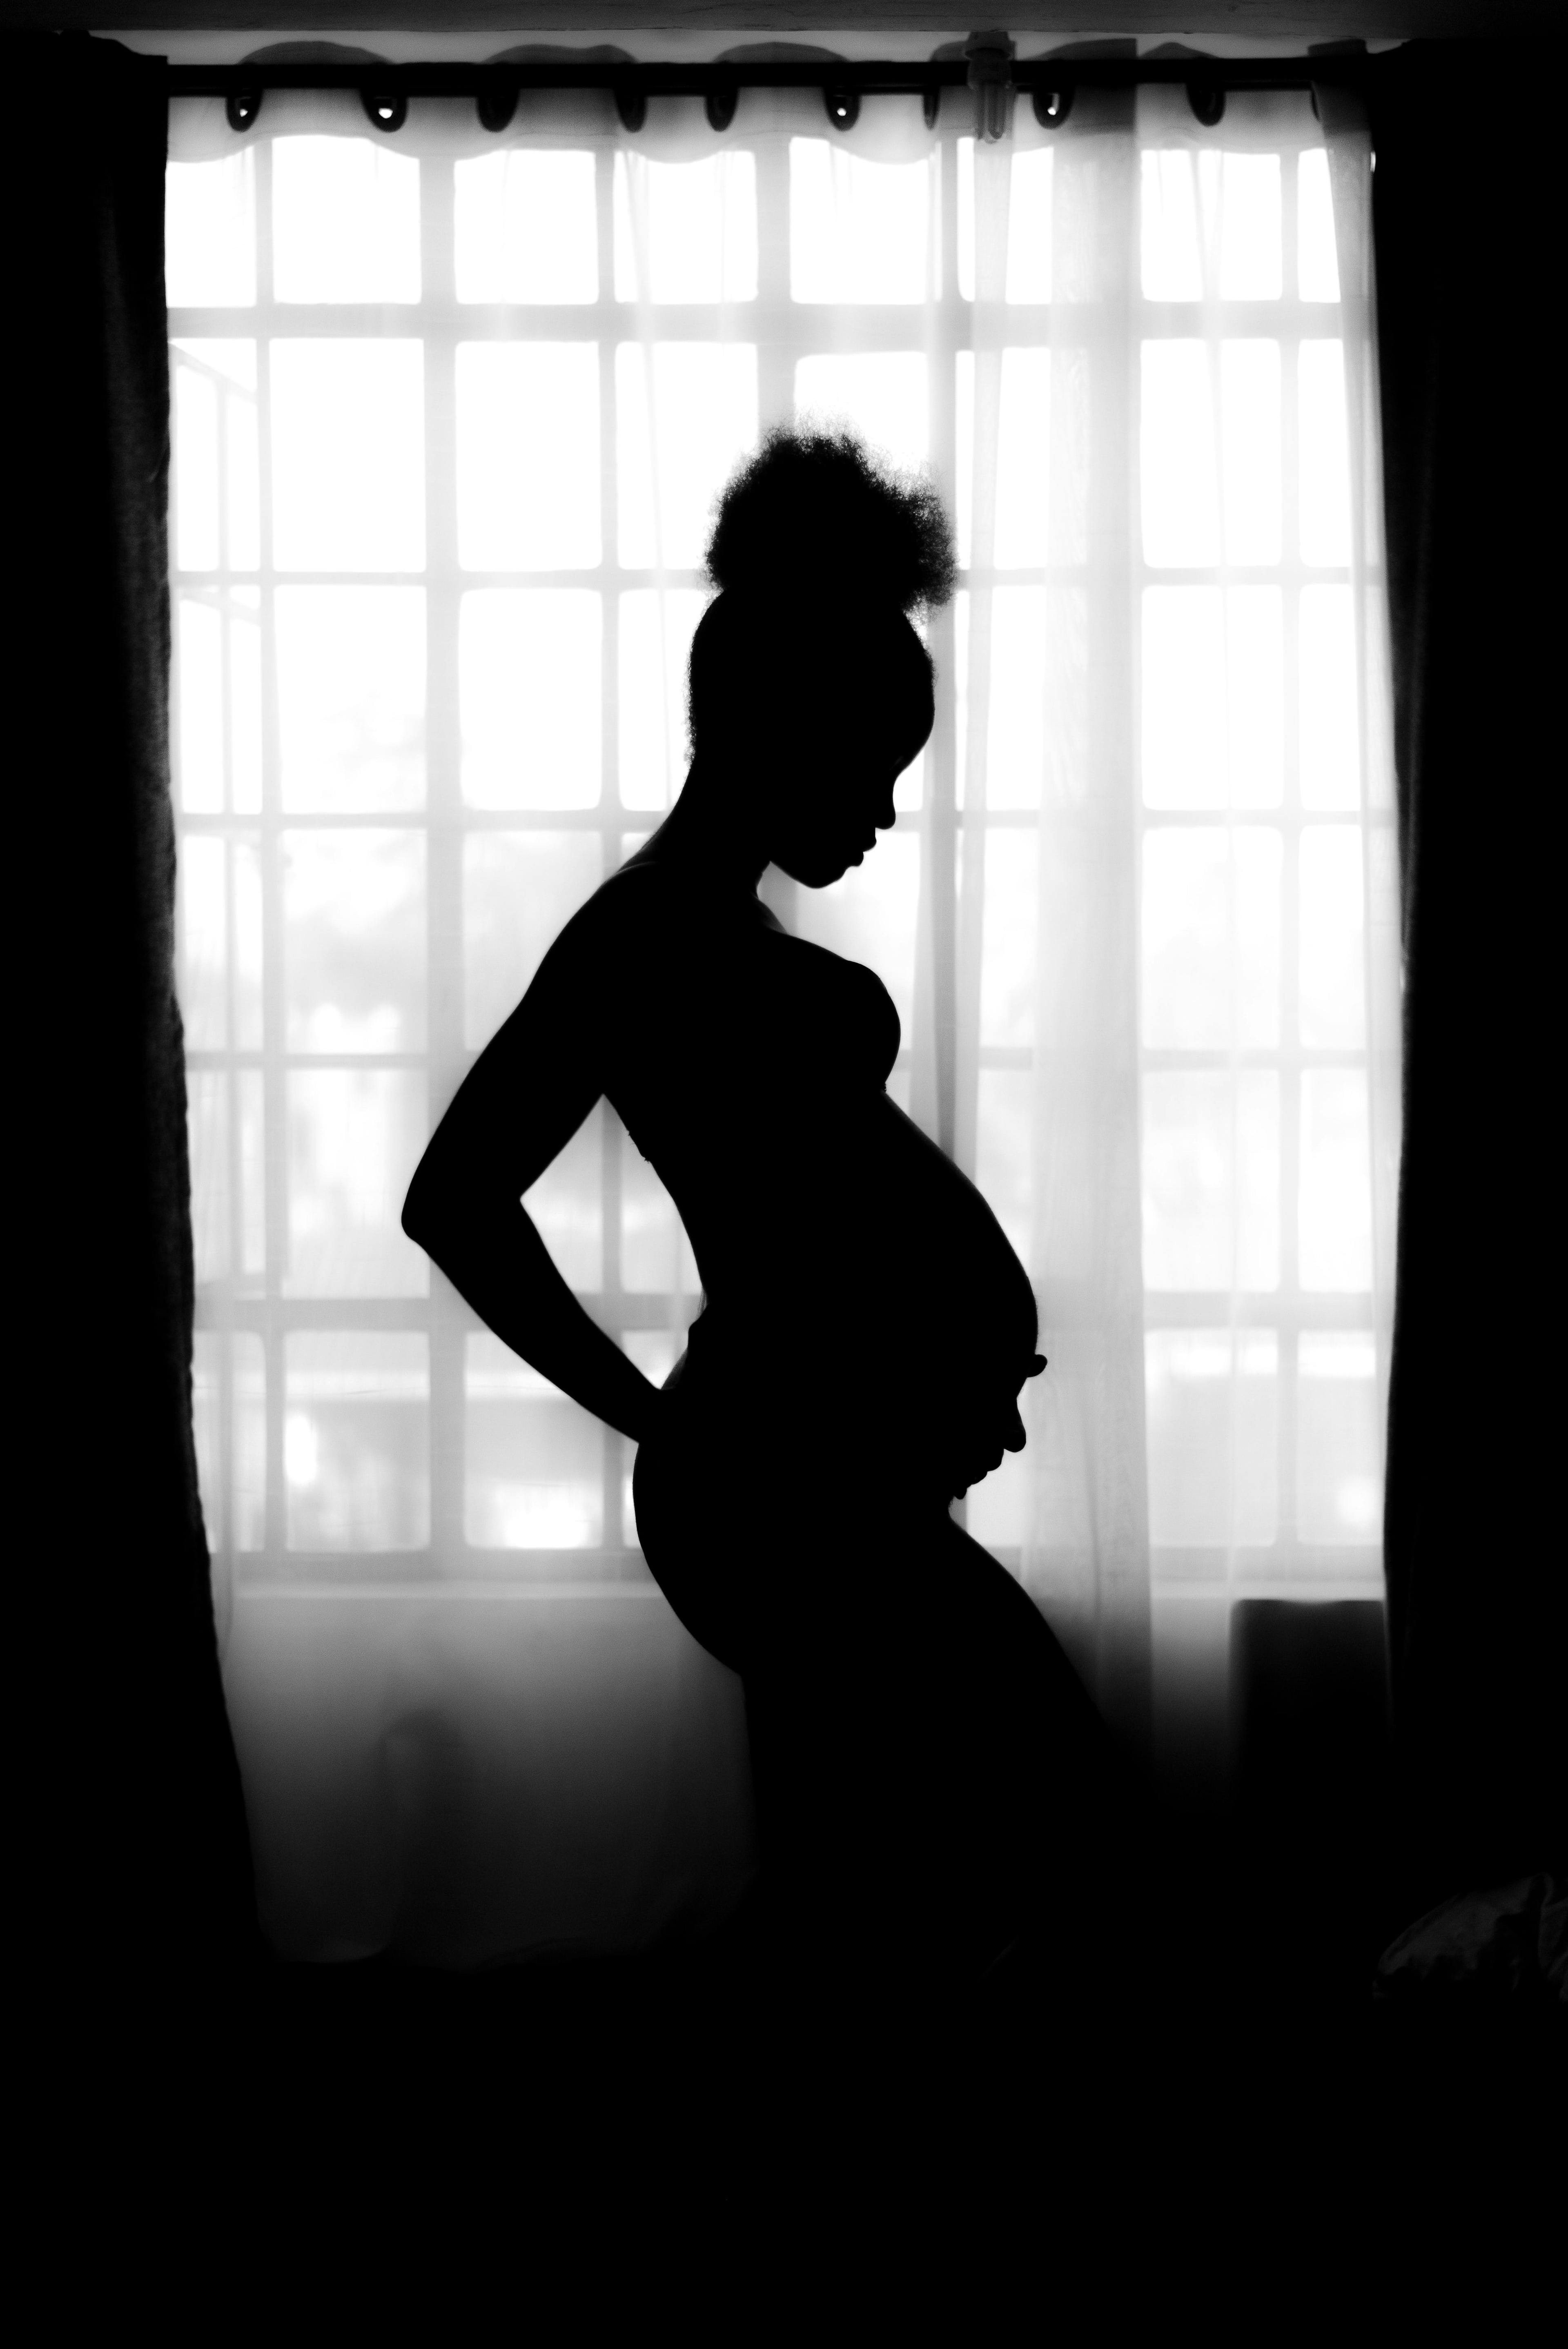 The Maternal Health Quality Improvement Act passes in the U.S. House of Representatives